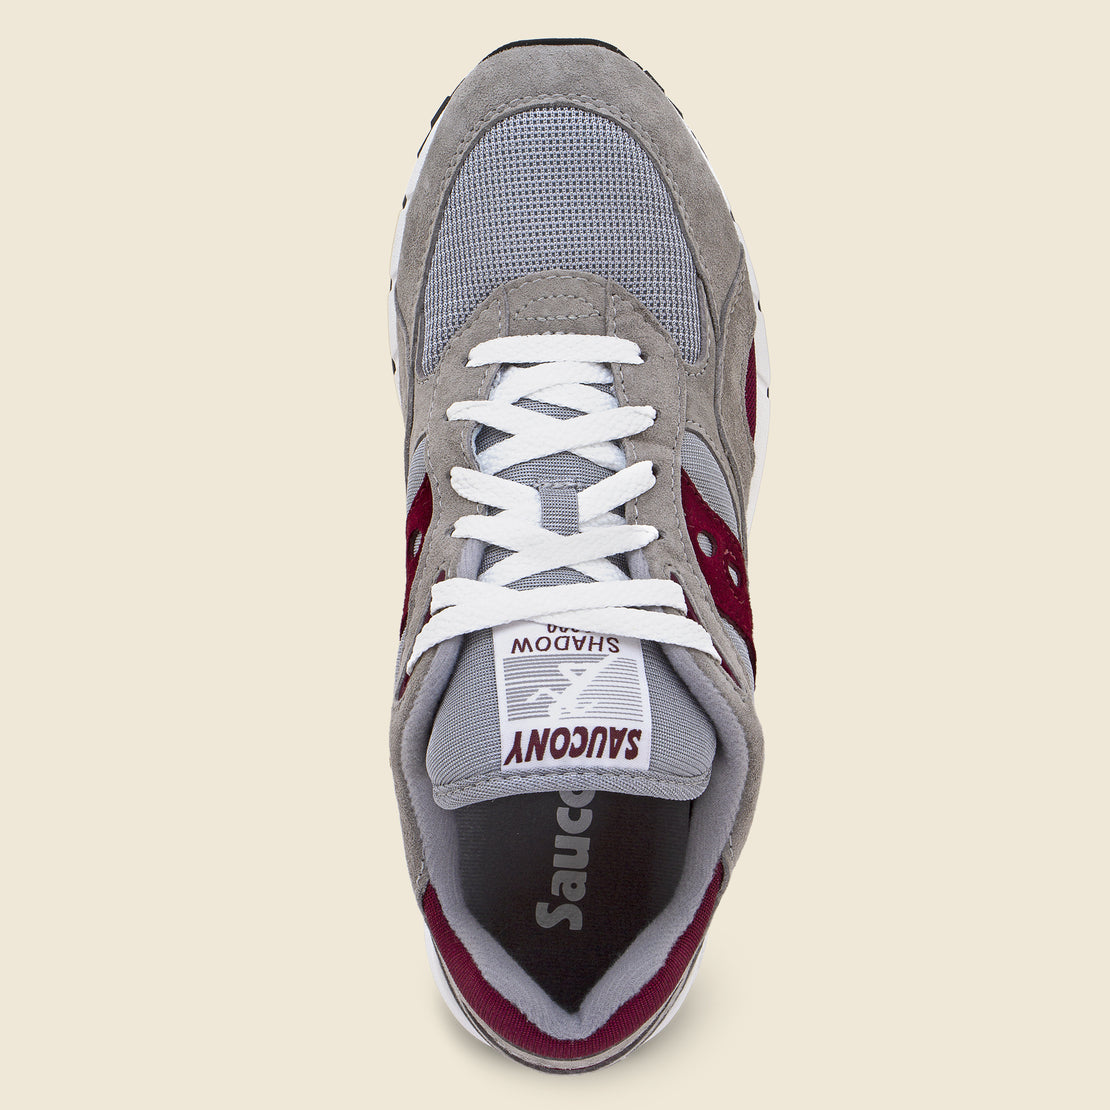 Shadow 6000 Sneaker - Grey/Burgundy - Saucony - STAG Provisions - Shoes - Athletic